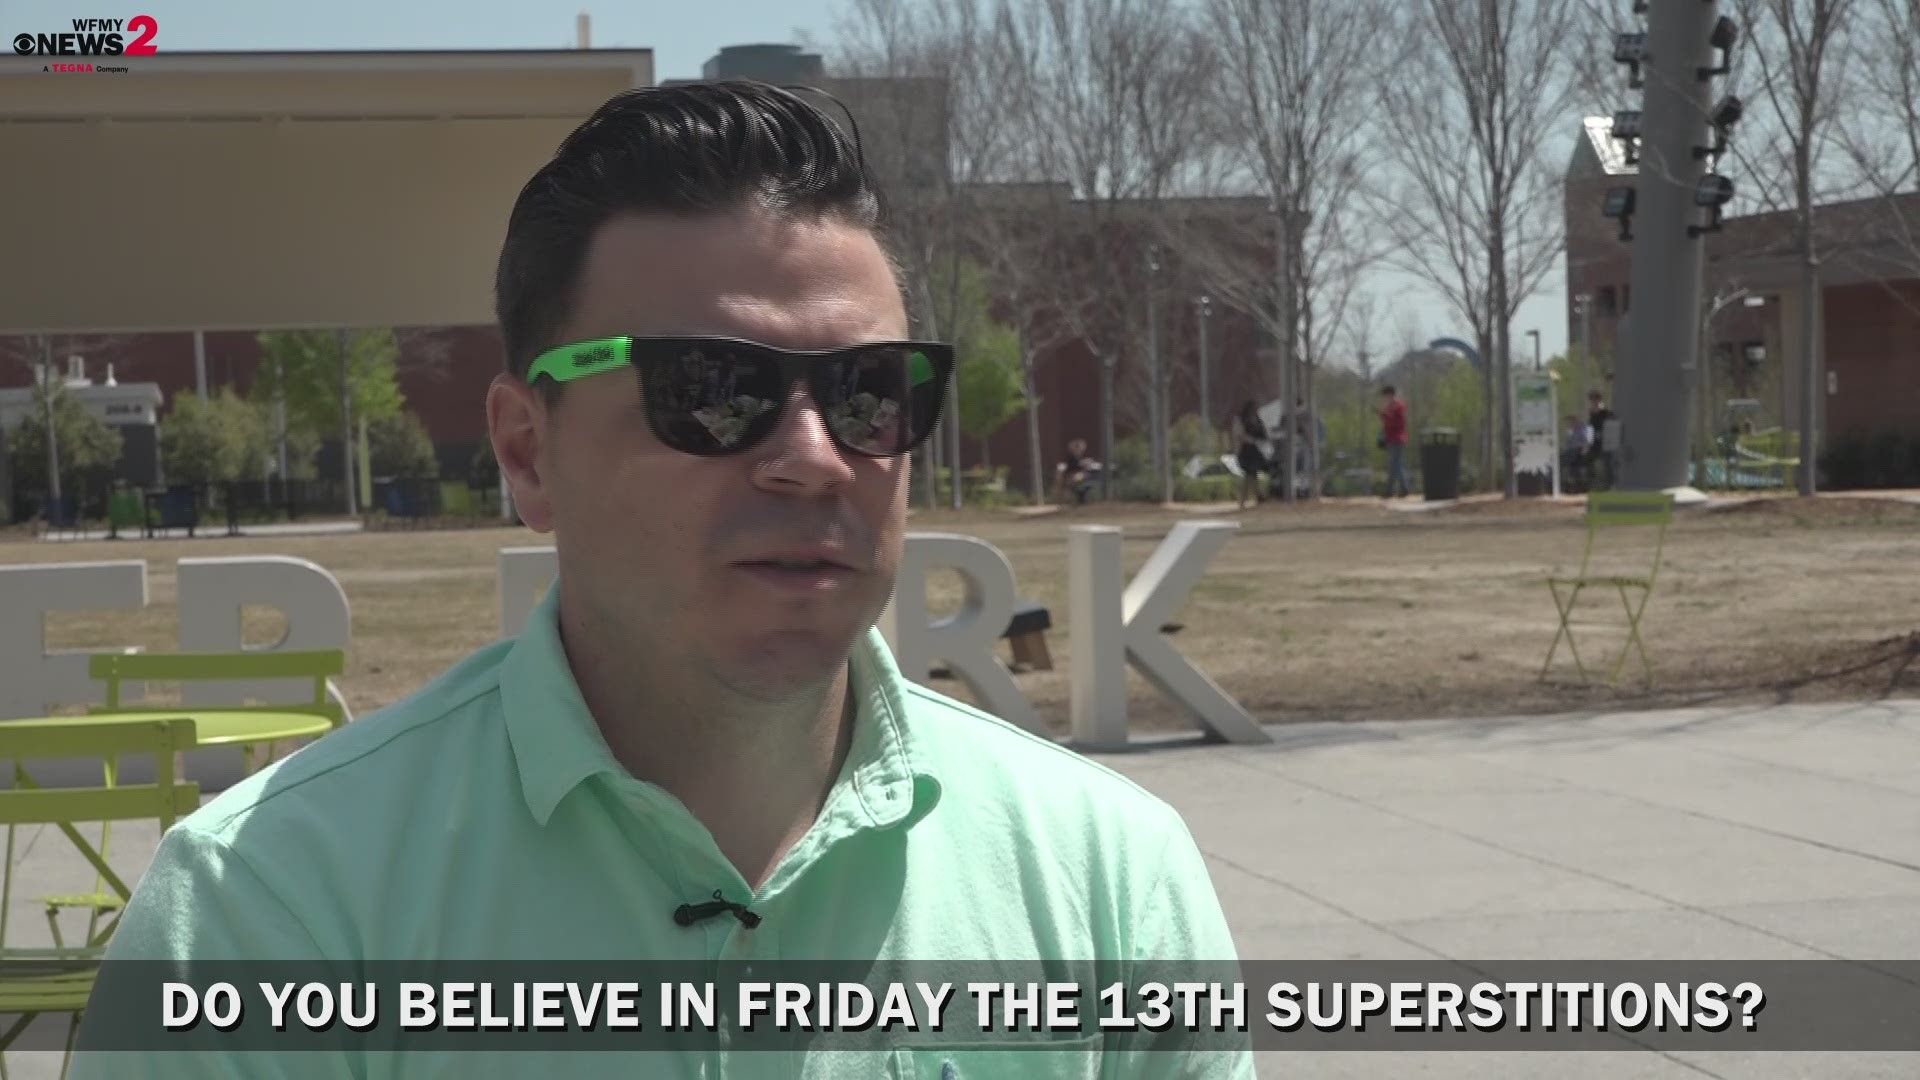 We asked people around Greensboro what they thought of Friday the 13th superstitions. Here's what they said